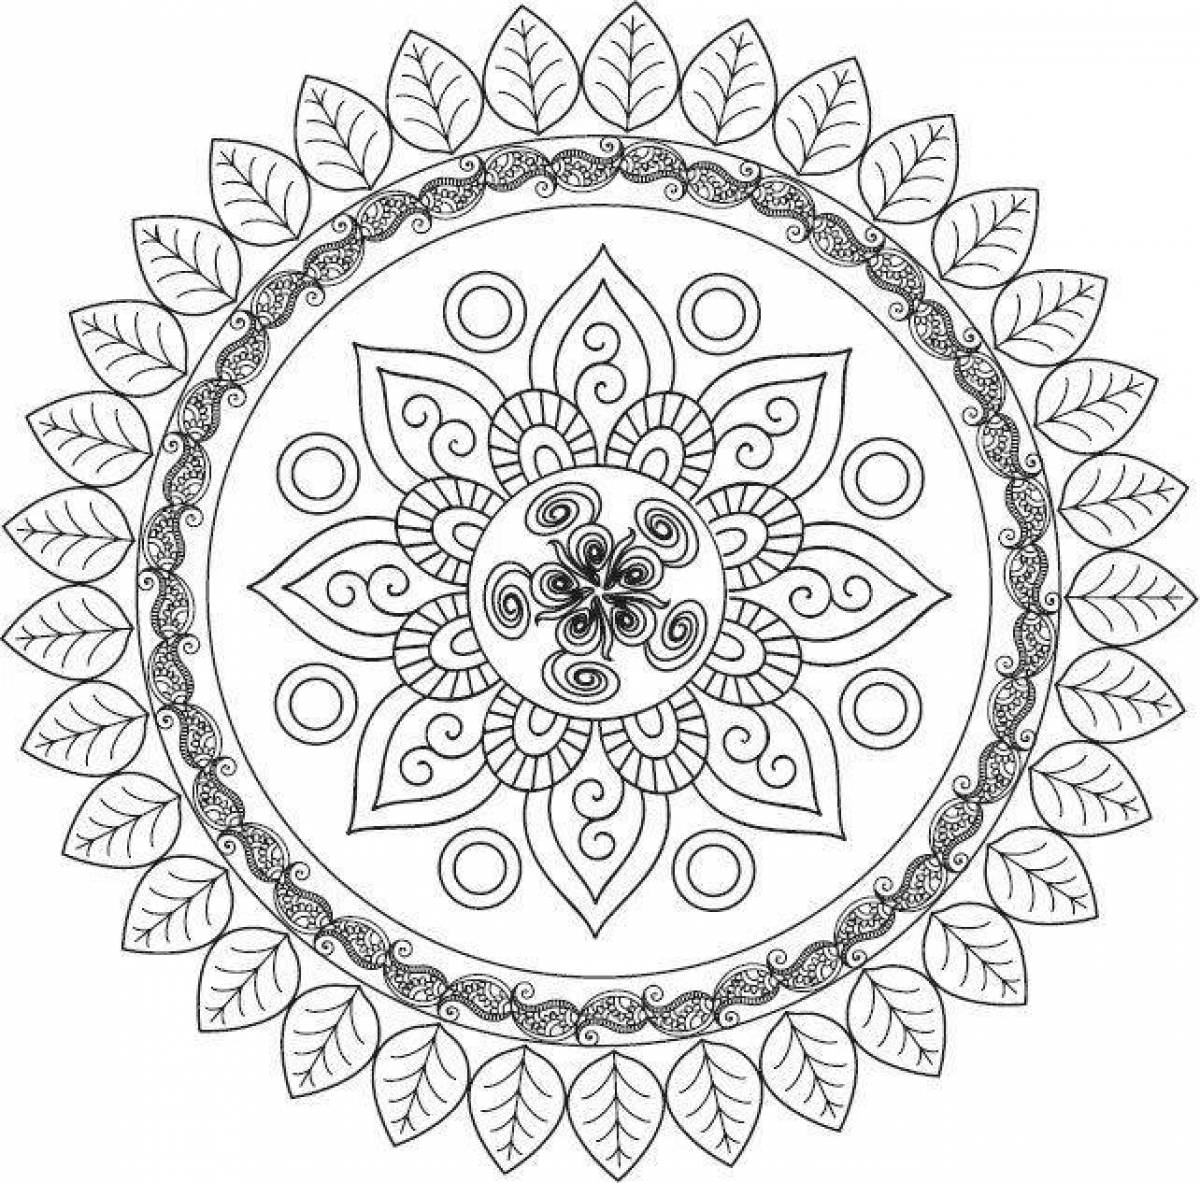 Mandala for good luck and success in everything #3